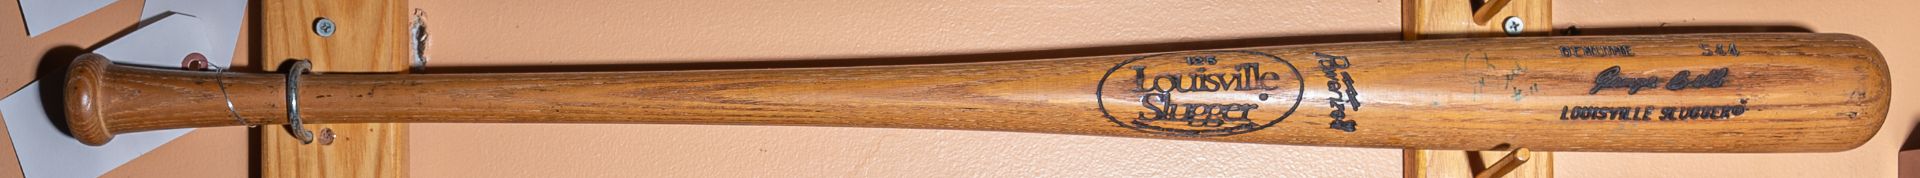 Autographed Louisville Slugger Wood Baseball Bat Stamped and Signed "George Bell #11"